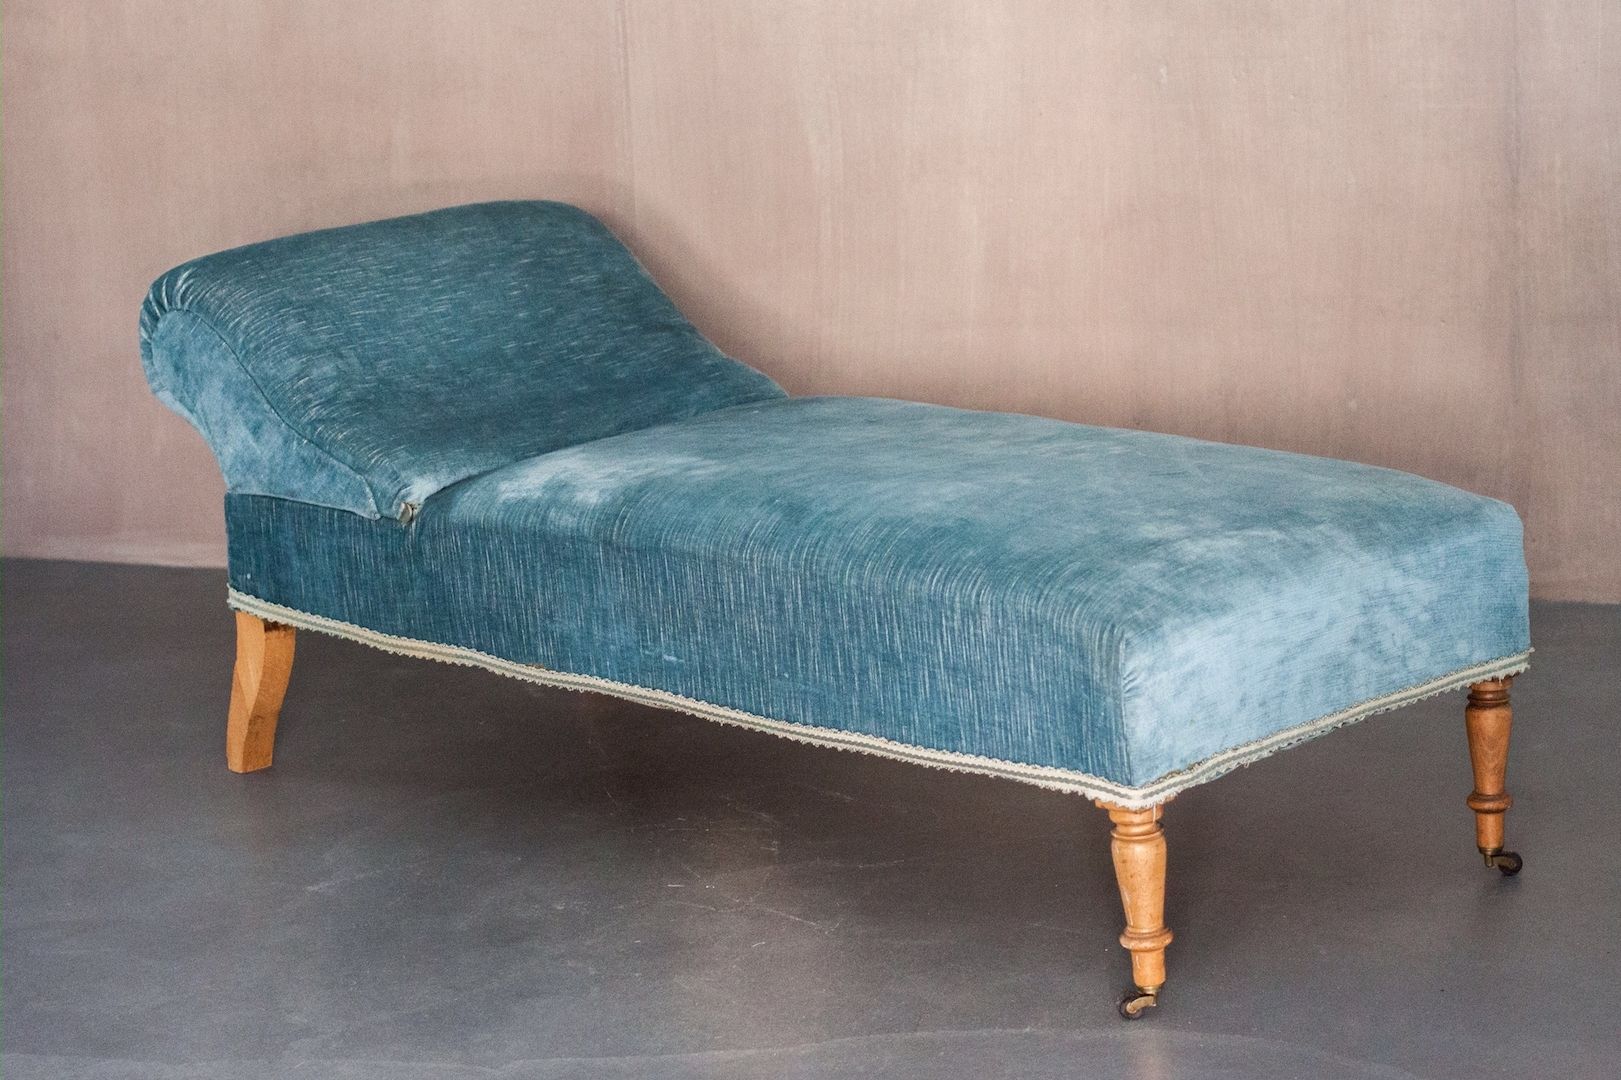 2017 Upholstered Chaise Lounges Regarding Vintage Chaise Lounge With Sky Blue Velvet Upholstery For Sale At (View 7 of 15)